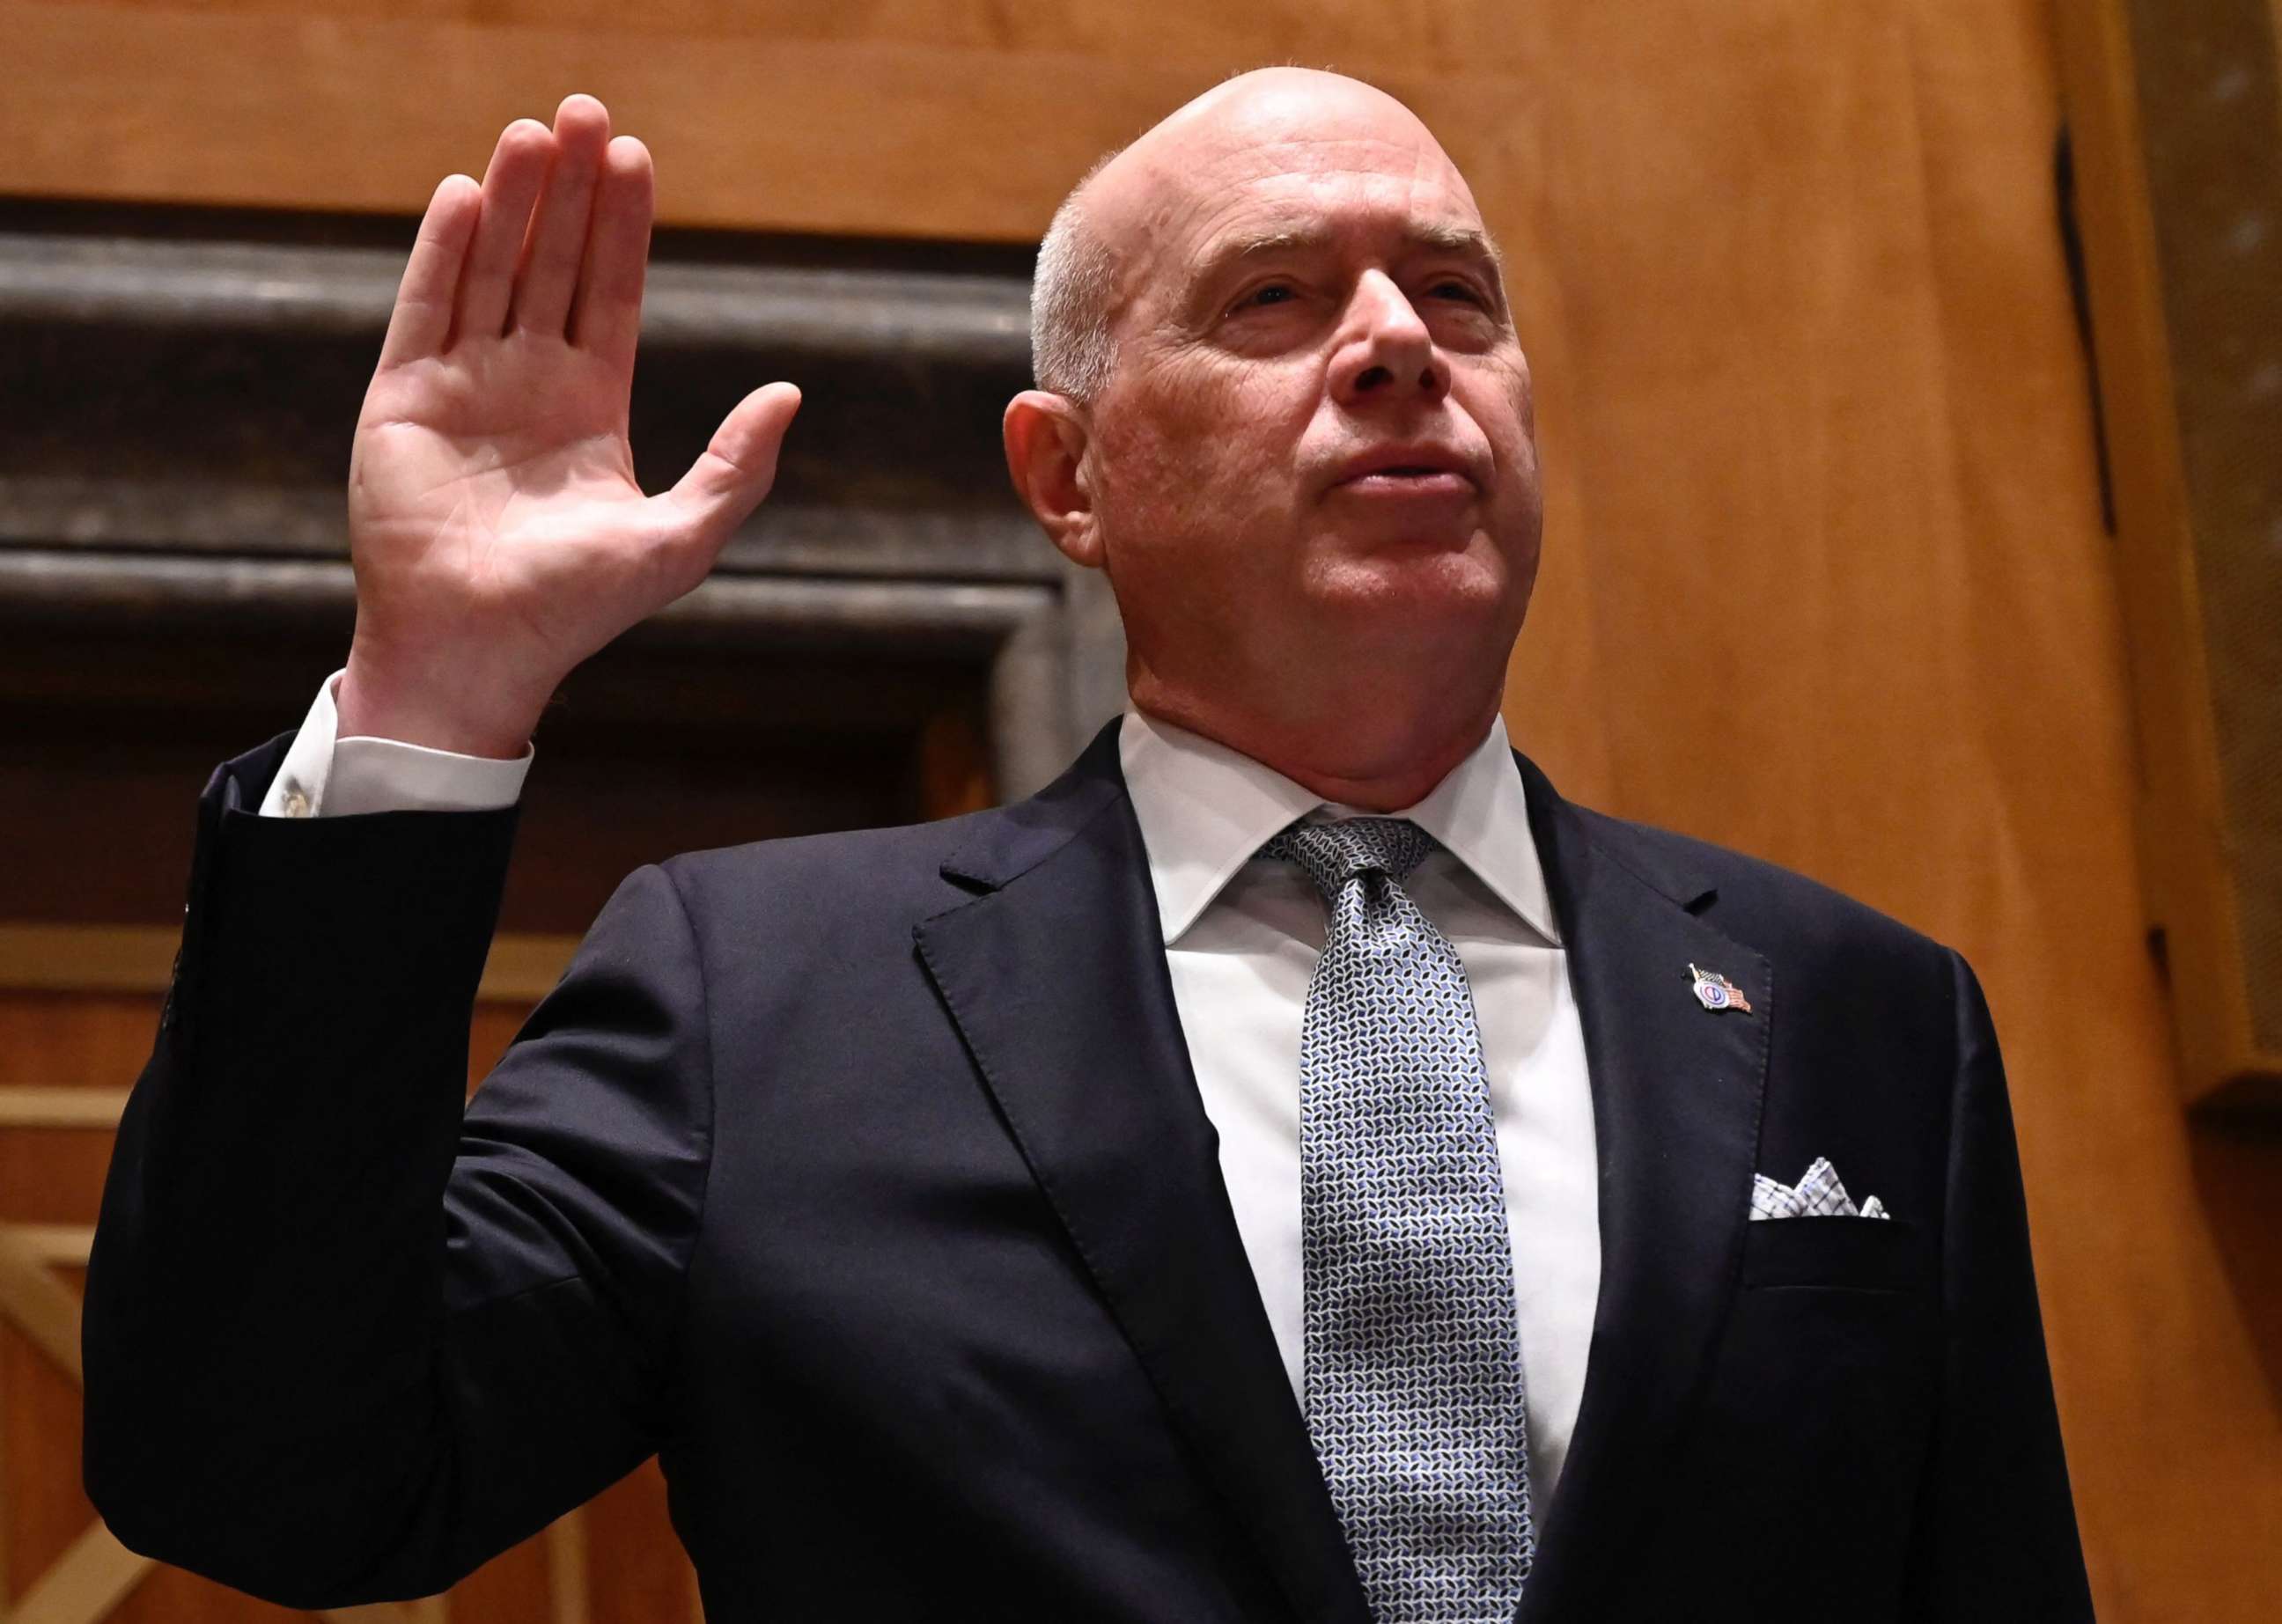 PHOTO: Joseph Blount, Jr., President and Chief Executive Officer, Colonial Pipeline is sworn in as he attends a hearing to examine threats to critical infrastructure at the Capitol in Washington, June 8, 2021.